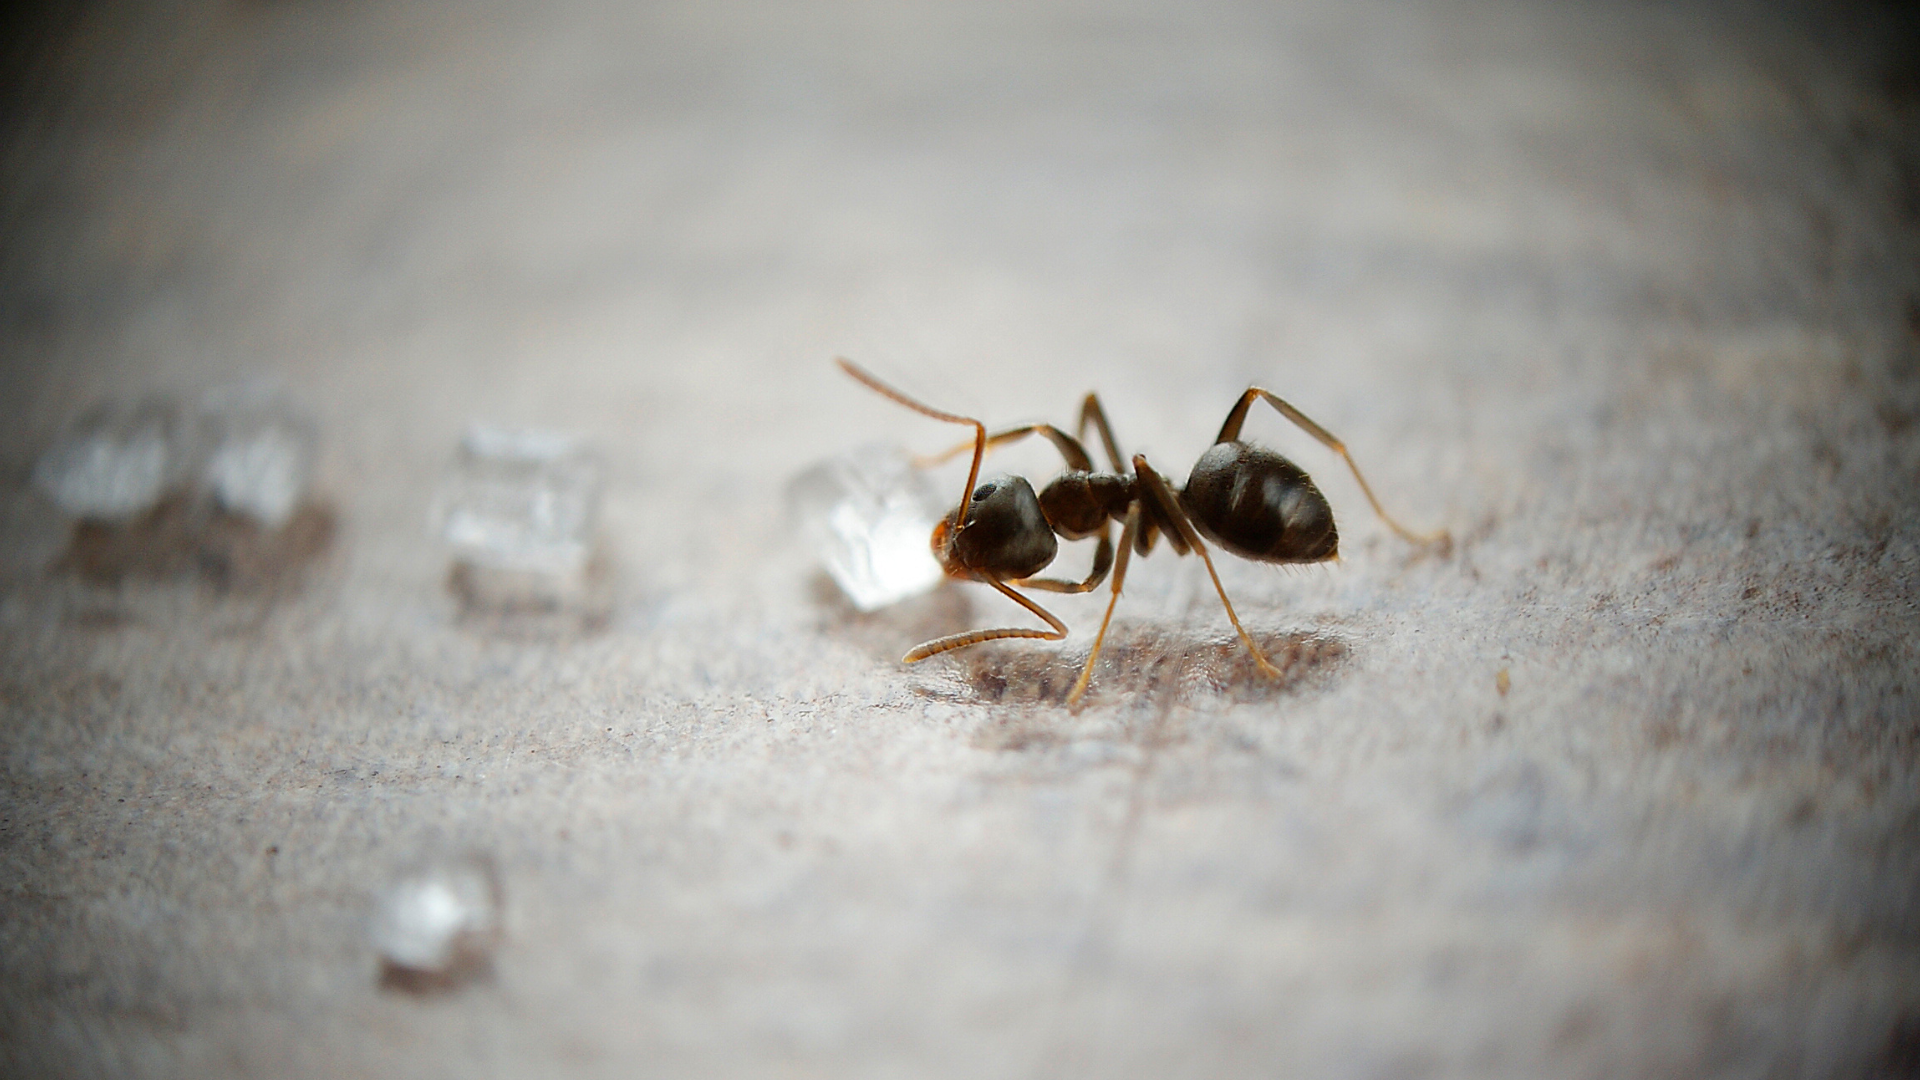 sugar ants tend to range from light brown to black in color